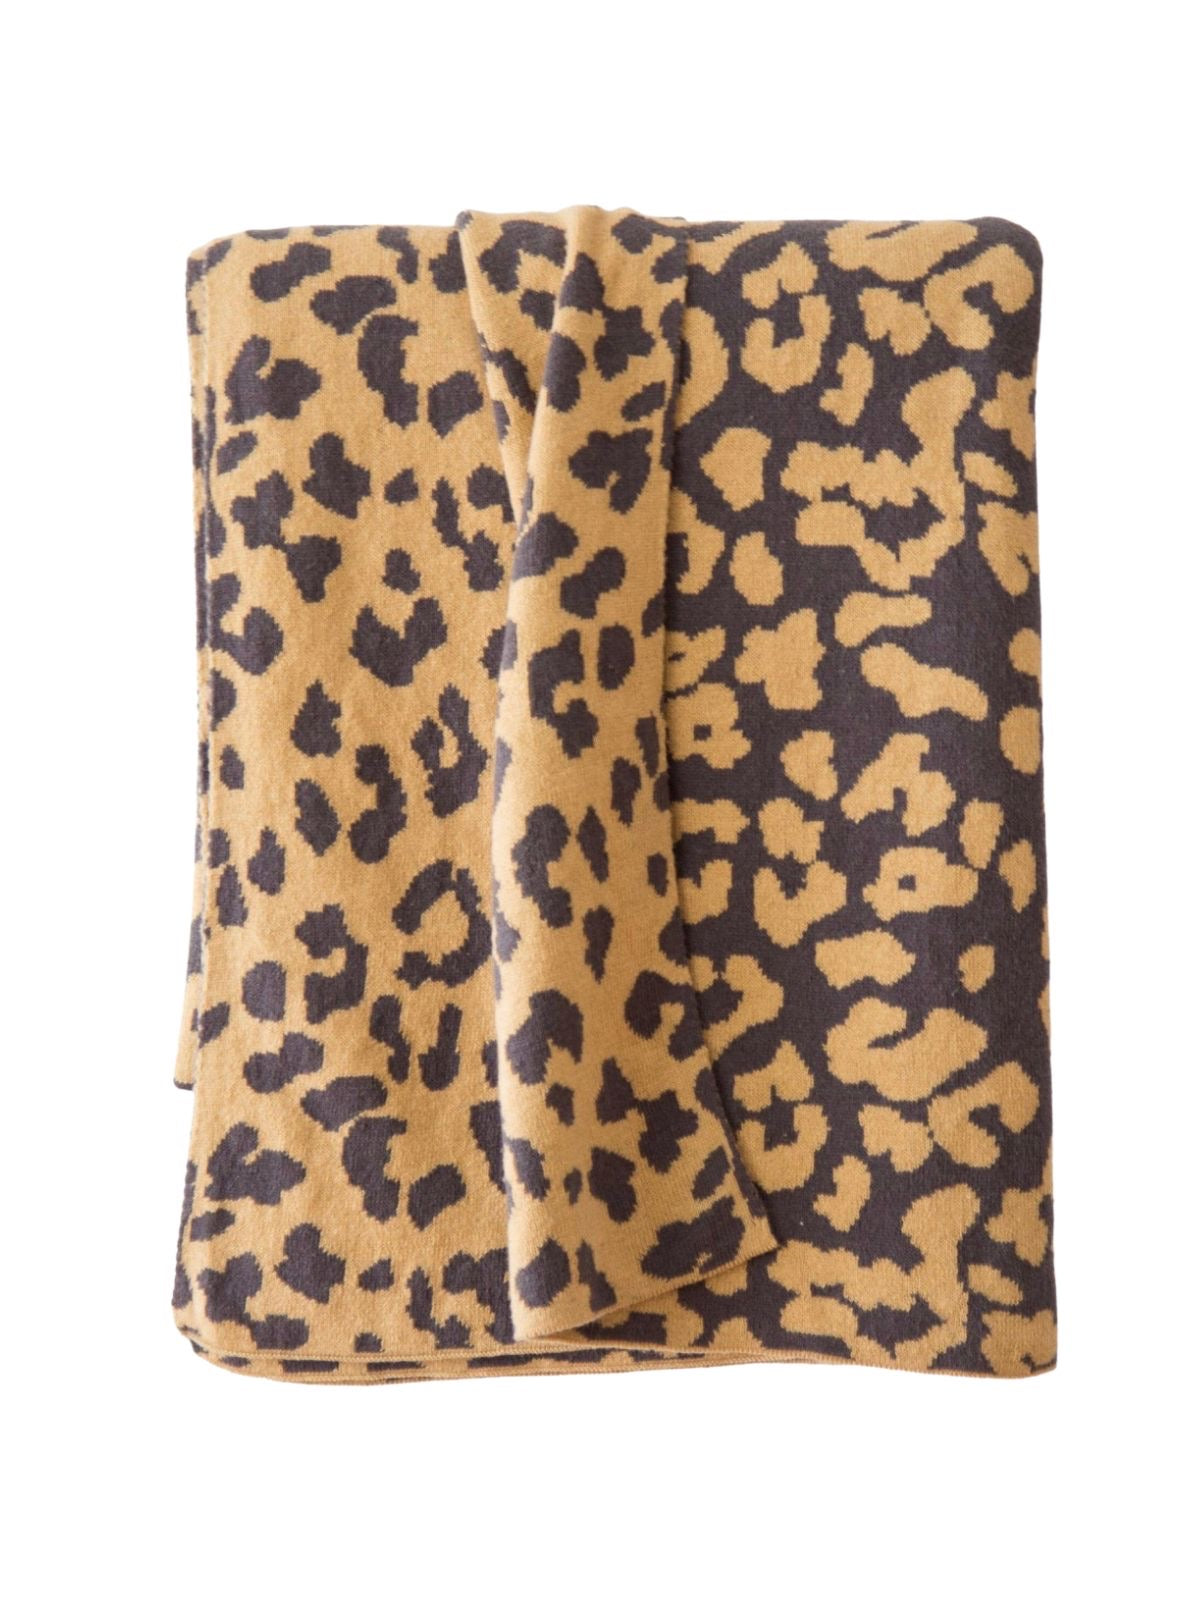 Leopard Print 100% Cotton Knit Decorative Throw Blanket in Beige Color sold by KYA Home Decor, 50W x 60L.